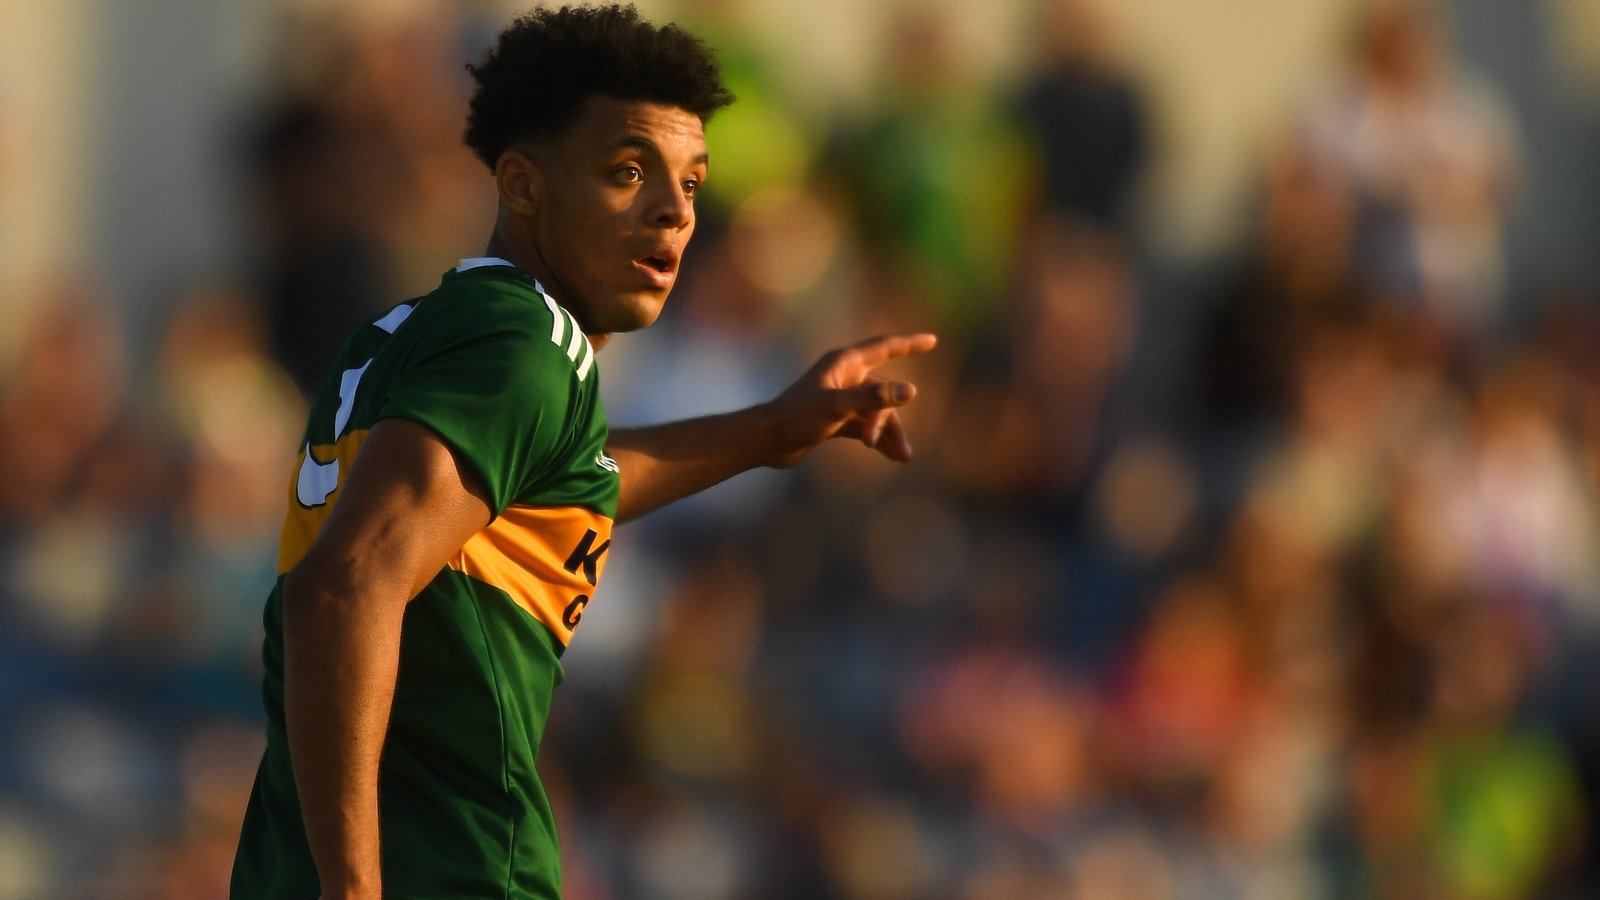 Image - In action for the Kerry U-20s in 2018